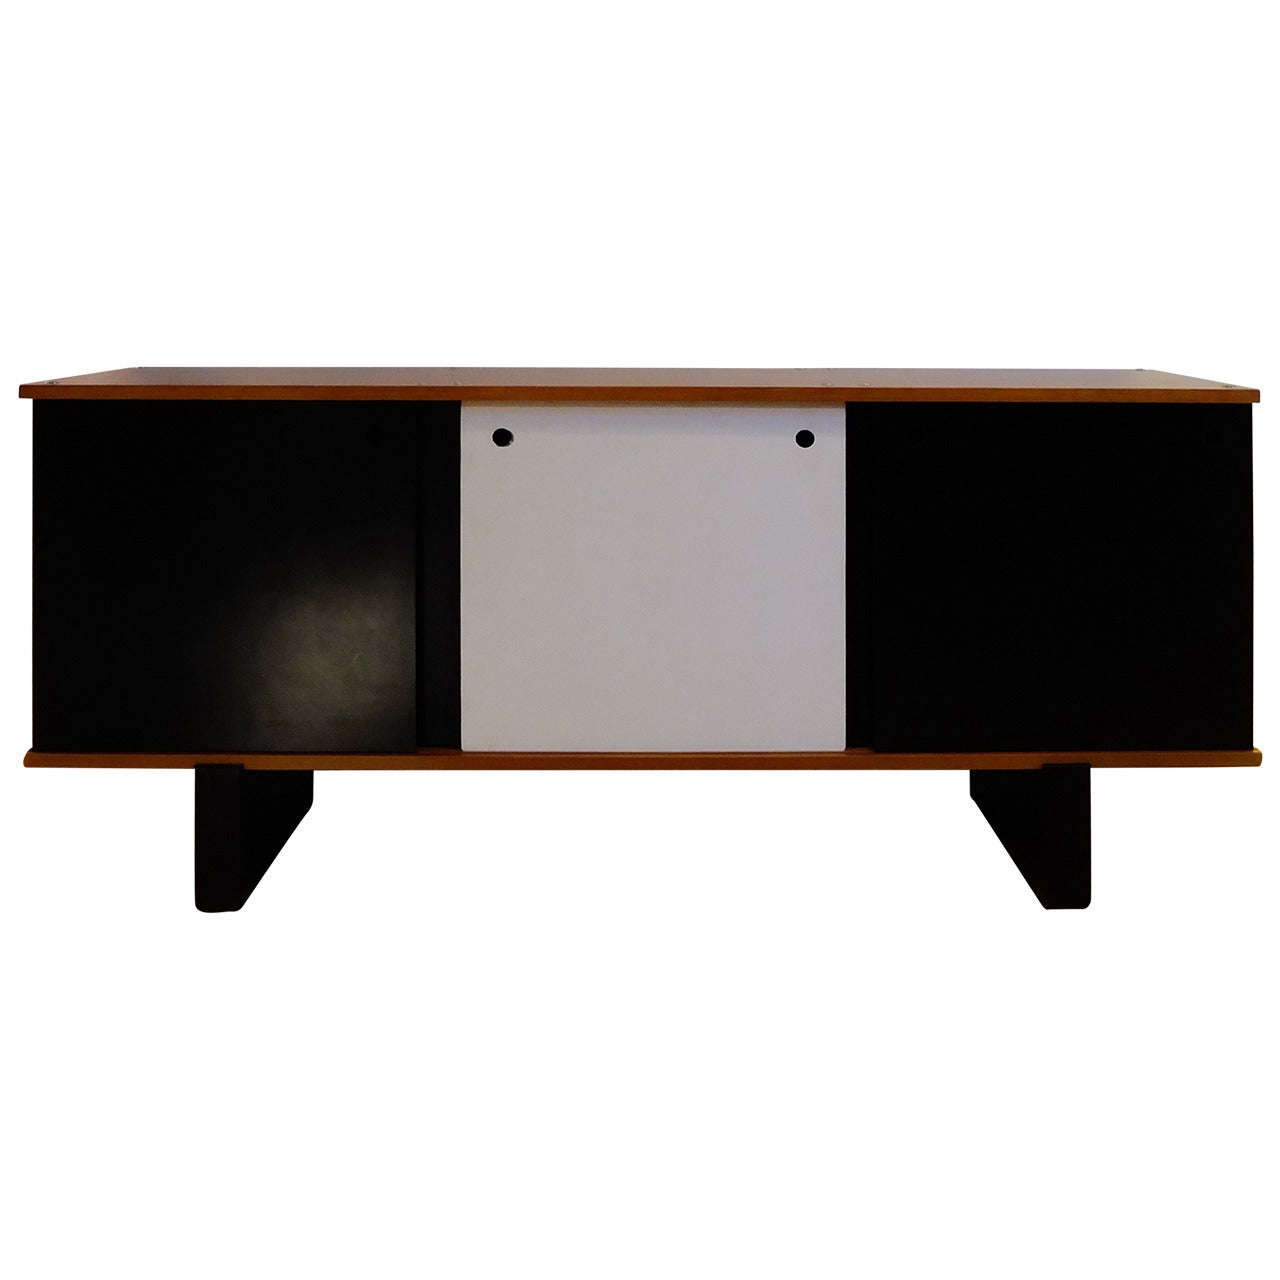 Original Bloc Sideboard from Charlotte Perriand